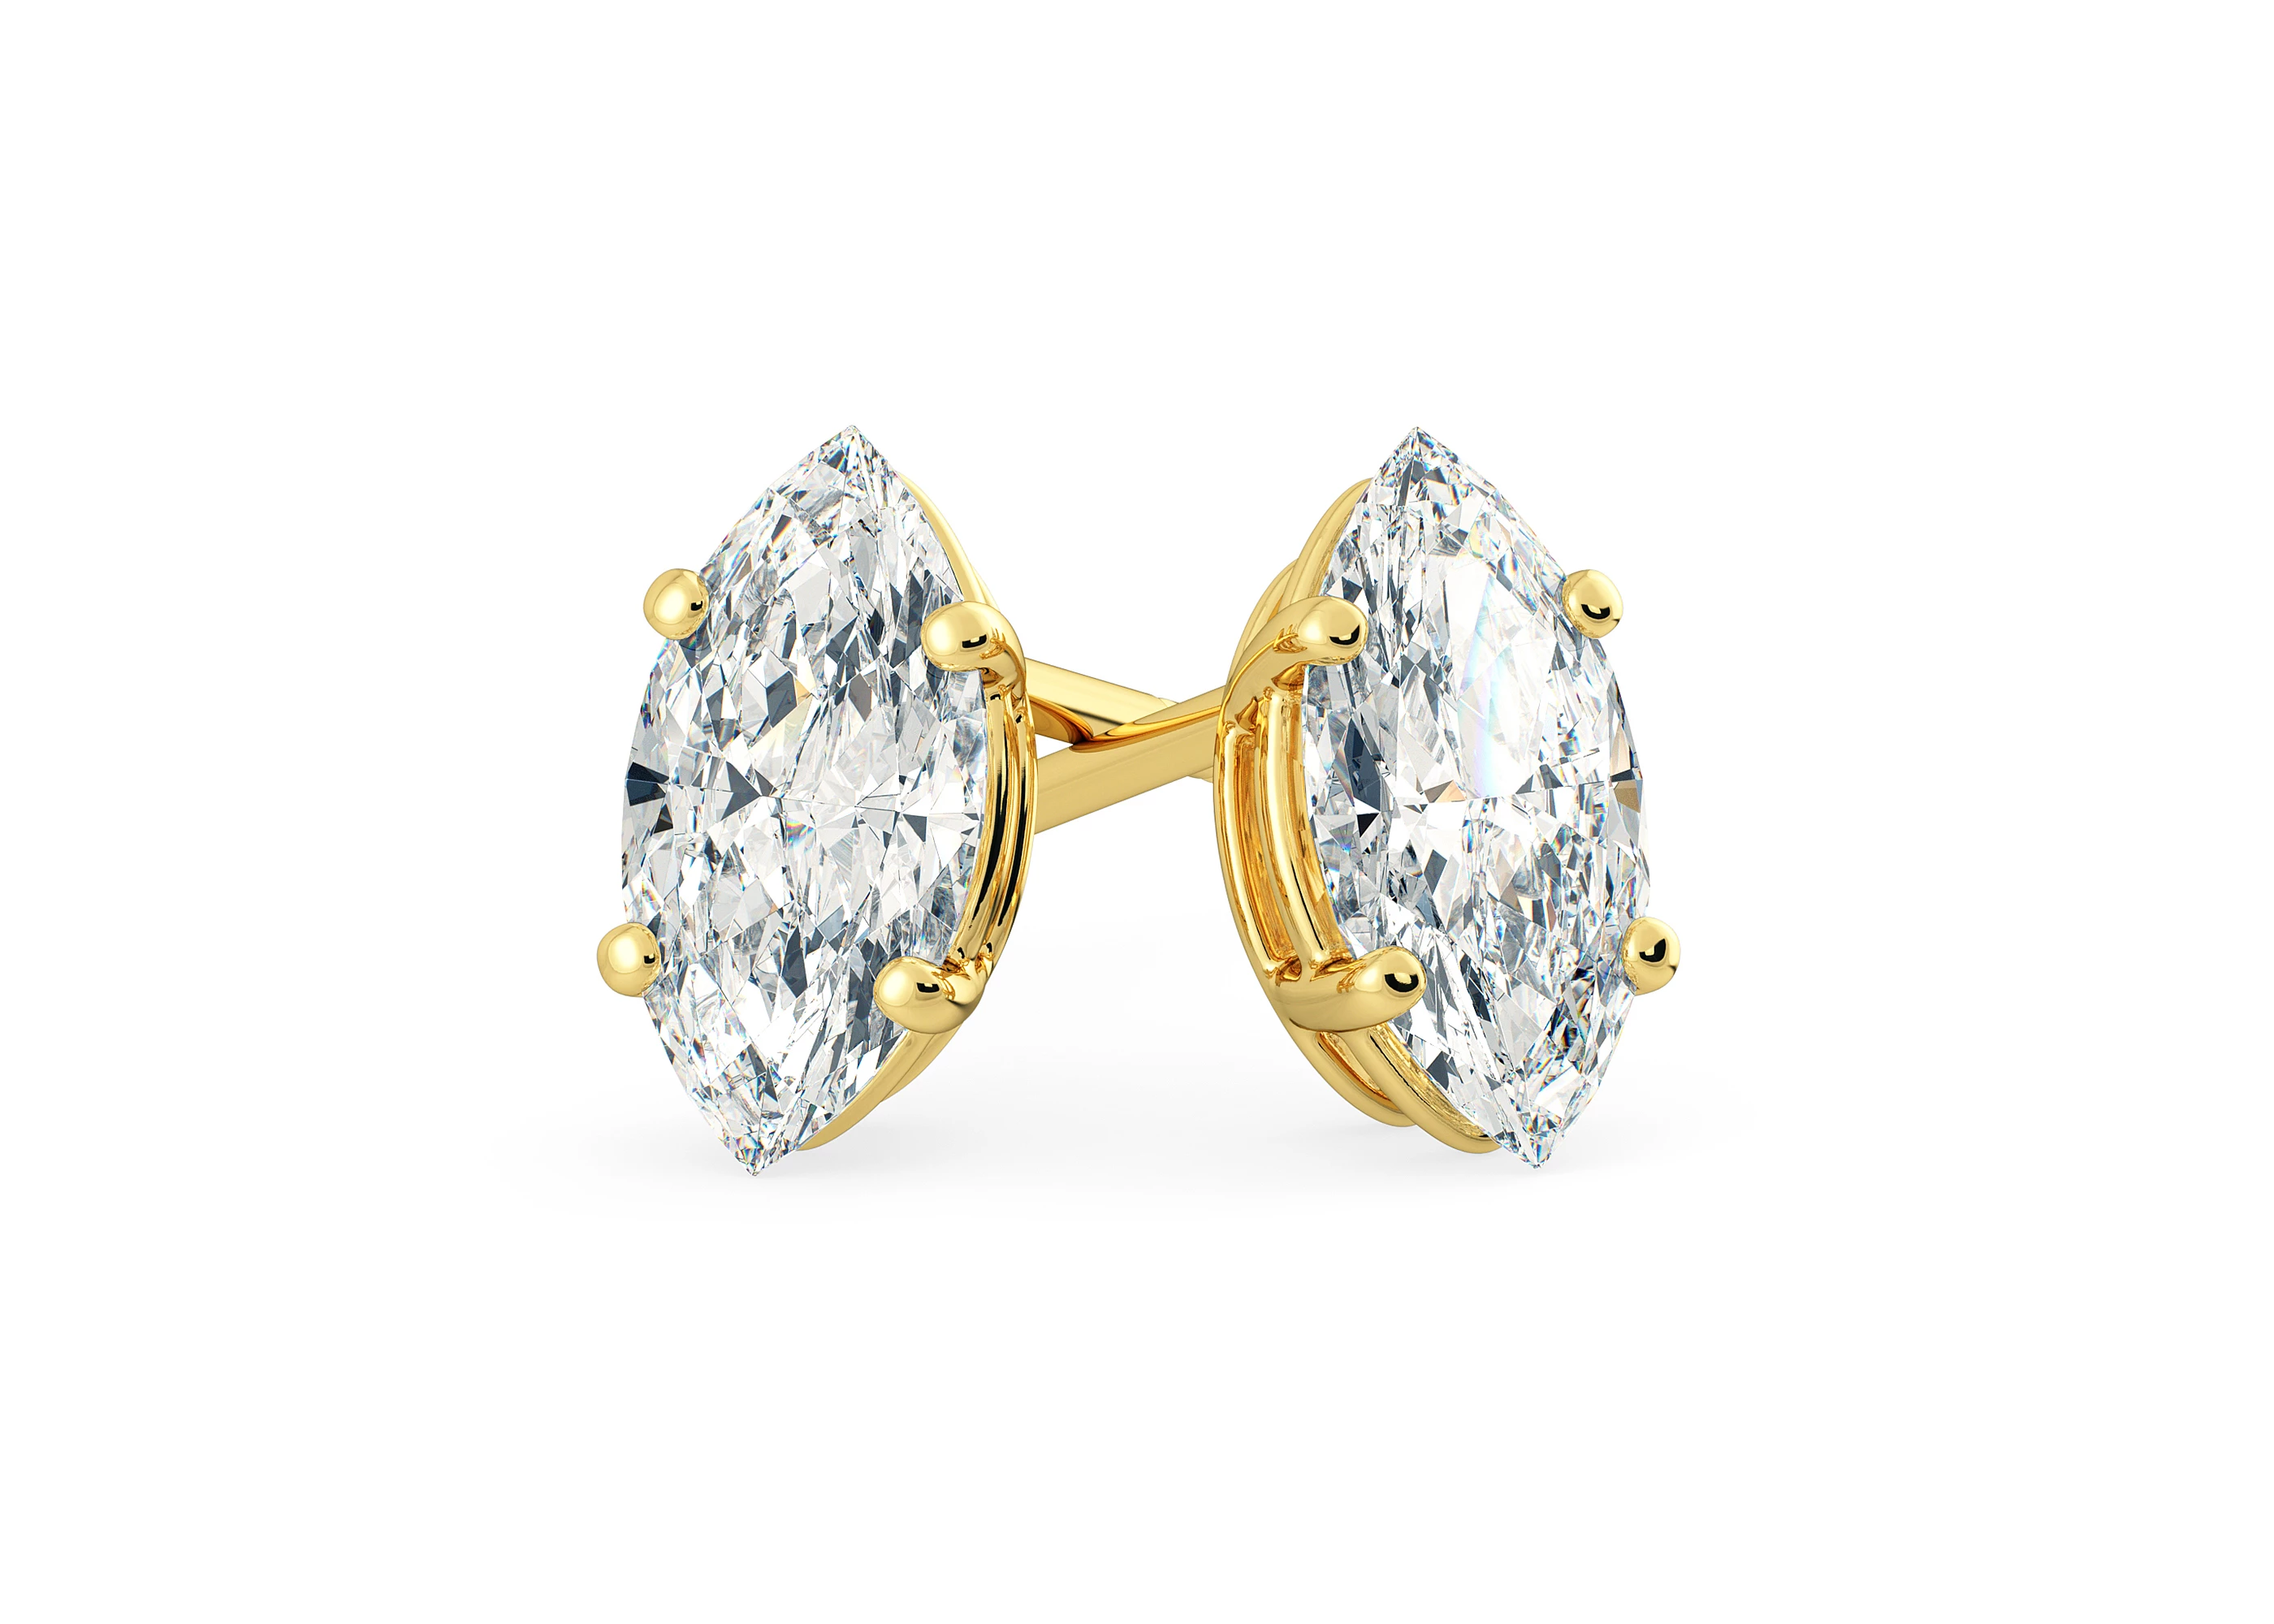 Ettore Marquise Diamond Stud Earrings in 18K Yellow Gold with Screw Backs